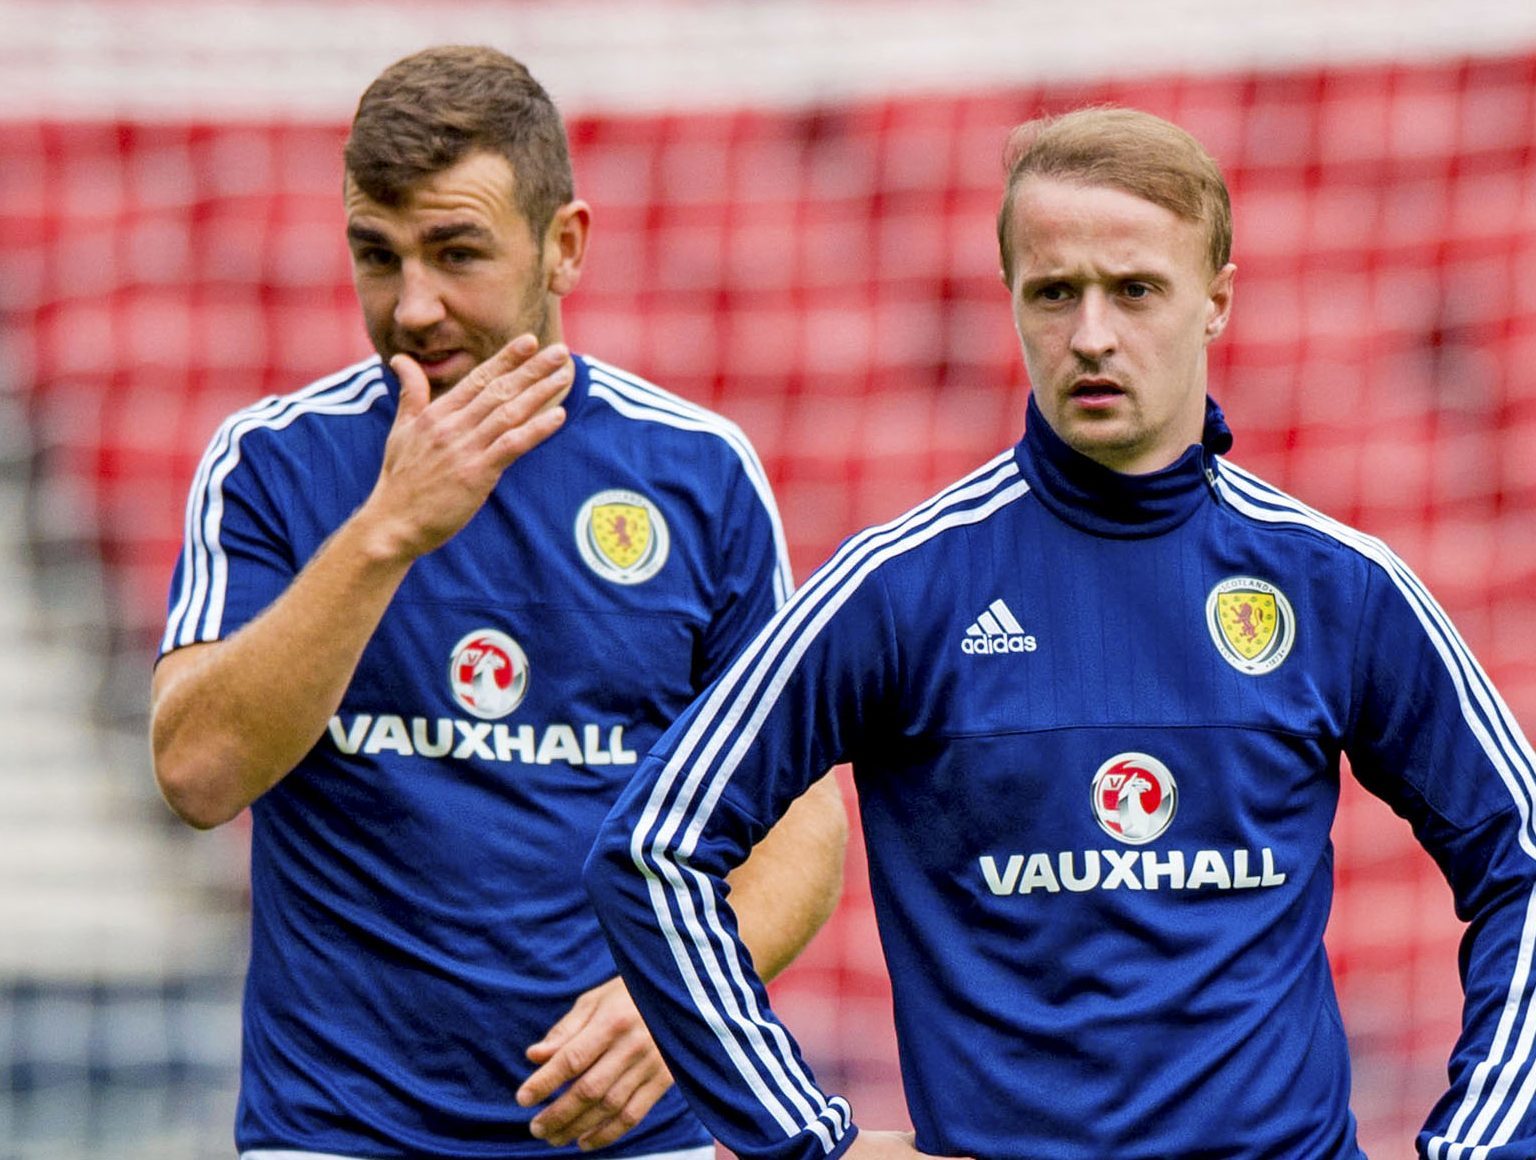 Leigh Griffiths trains at Hampden Park, but will he start against Lithuania?